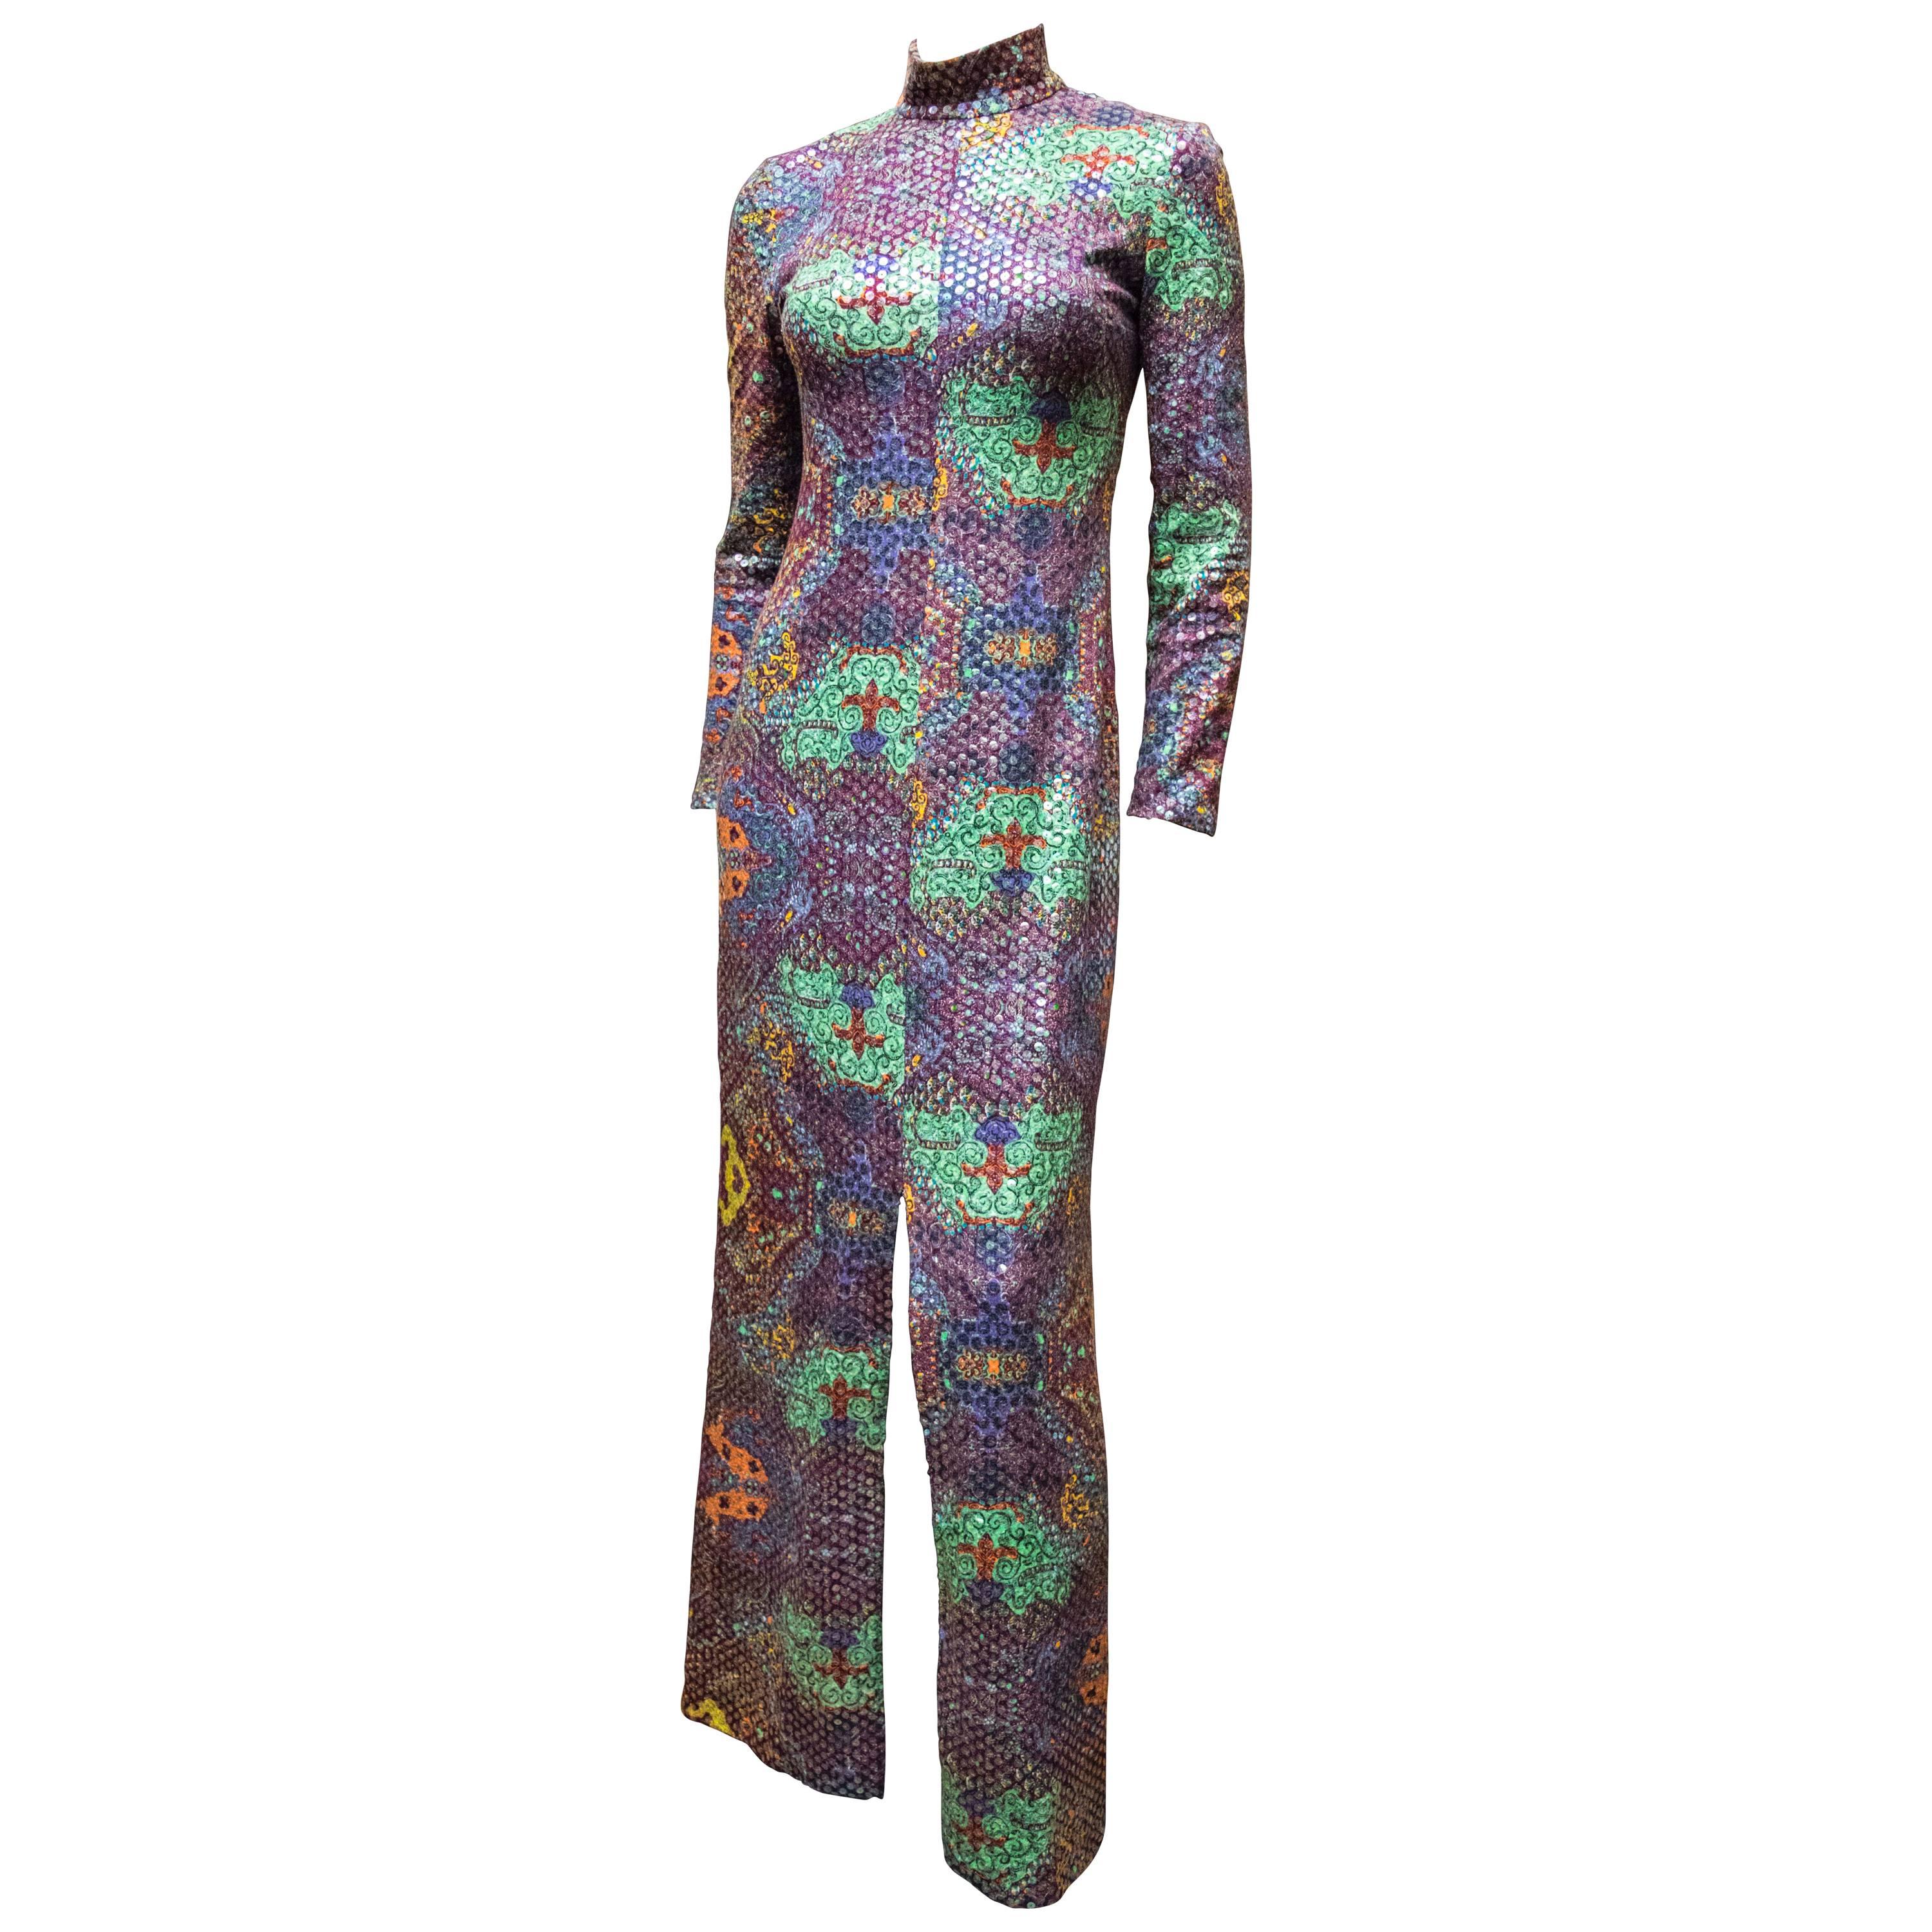 Malcolm Starr Sequined Psychedelic Dress, 1970s